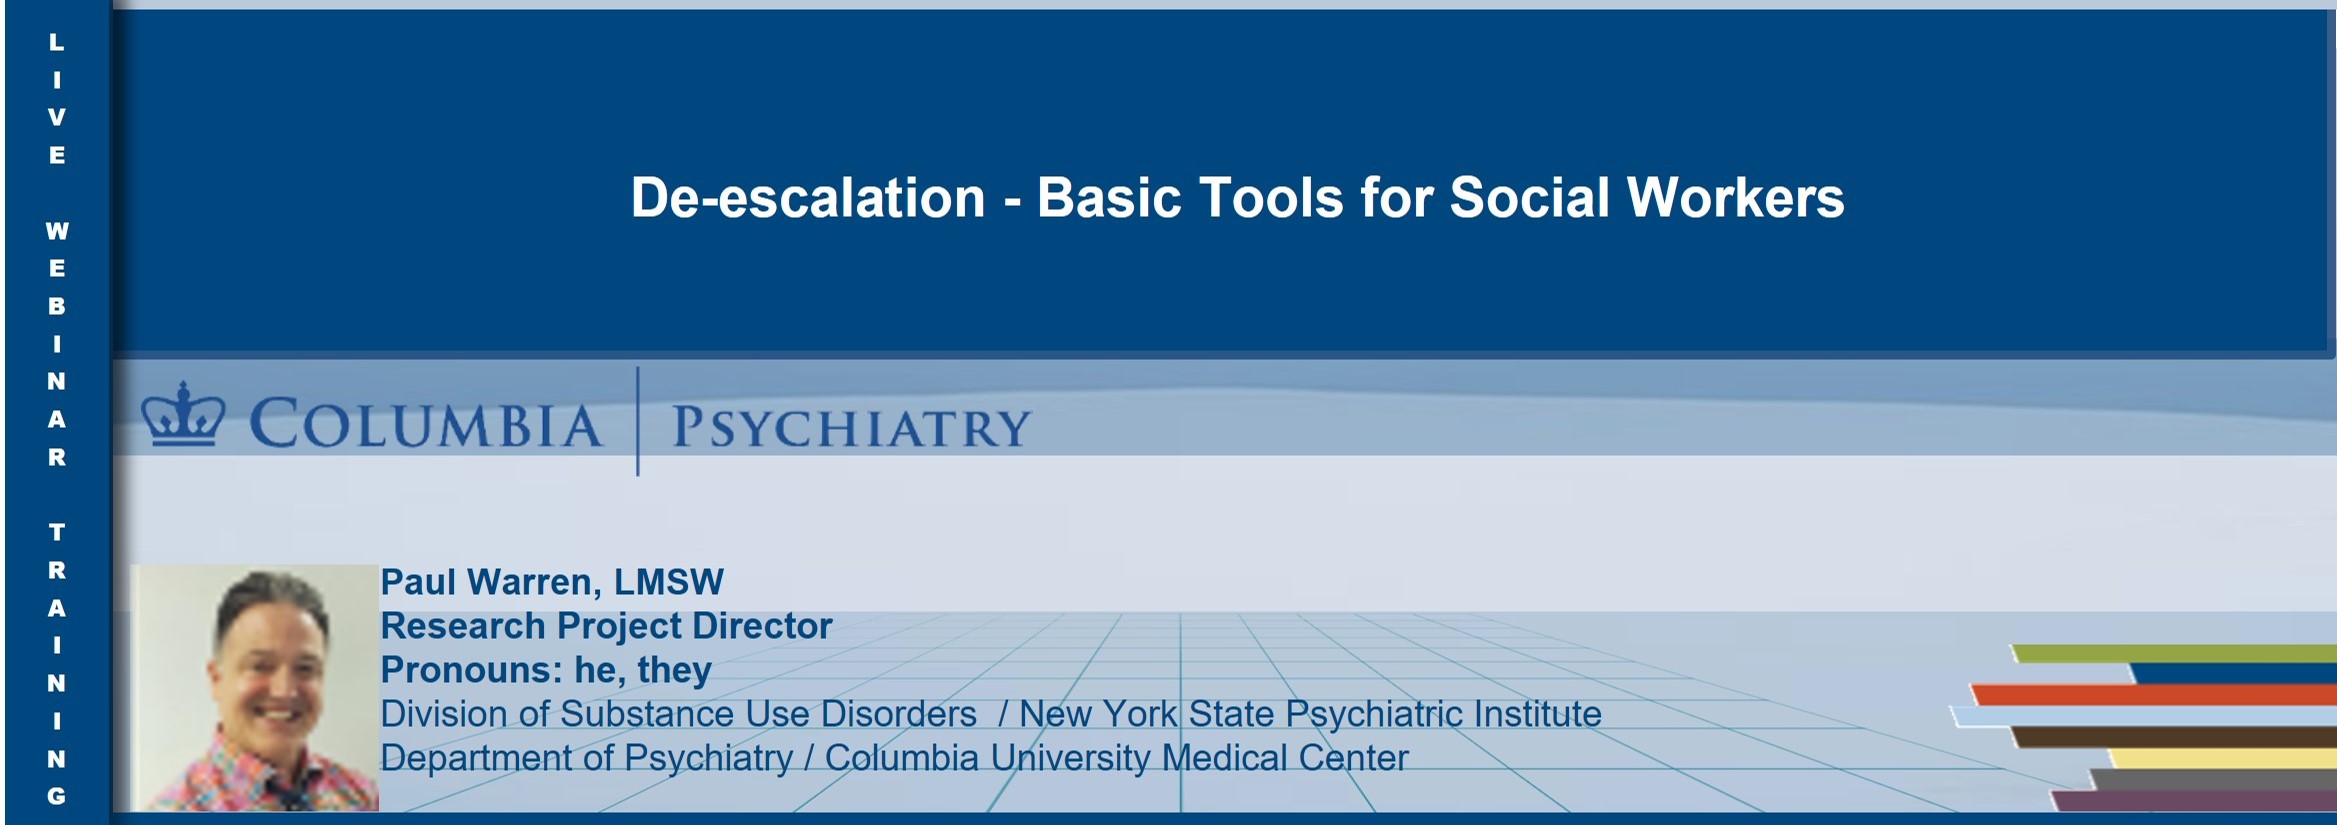 De-escalation - Basic Tools for Social Workers